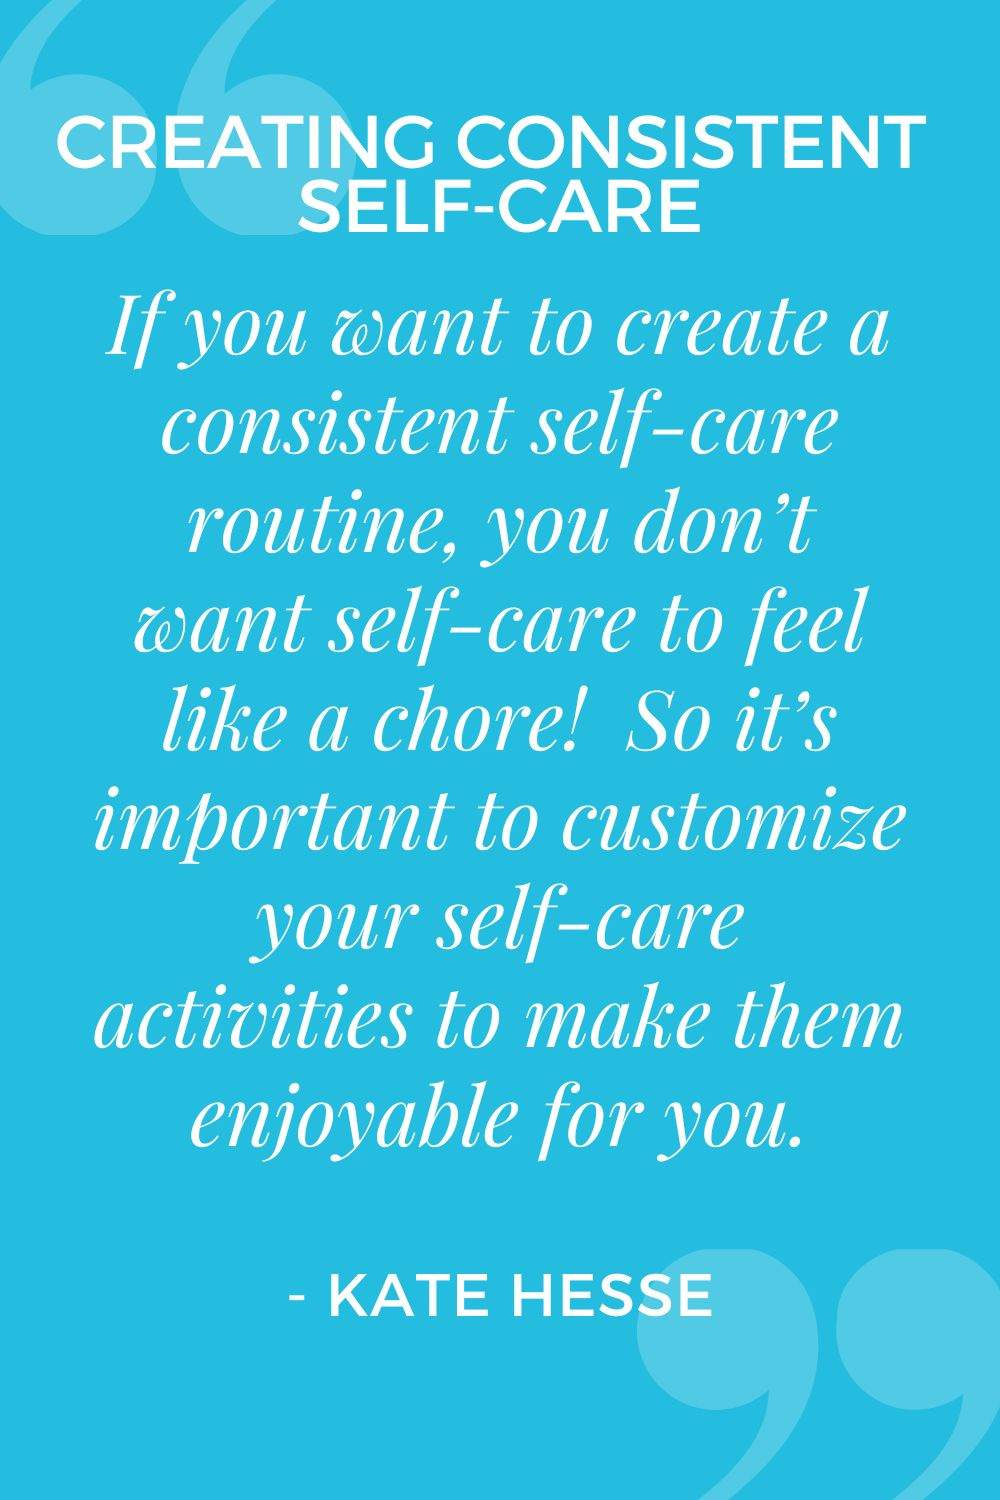 If you want to create a consistent self-care routine, you don't want self-care to feel like a chore!  So it's important to customize your self-care activities to make them enjoyable for you.